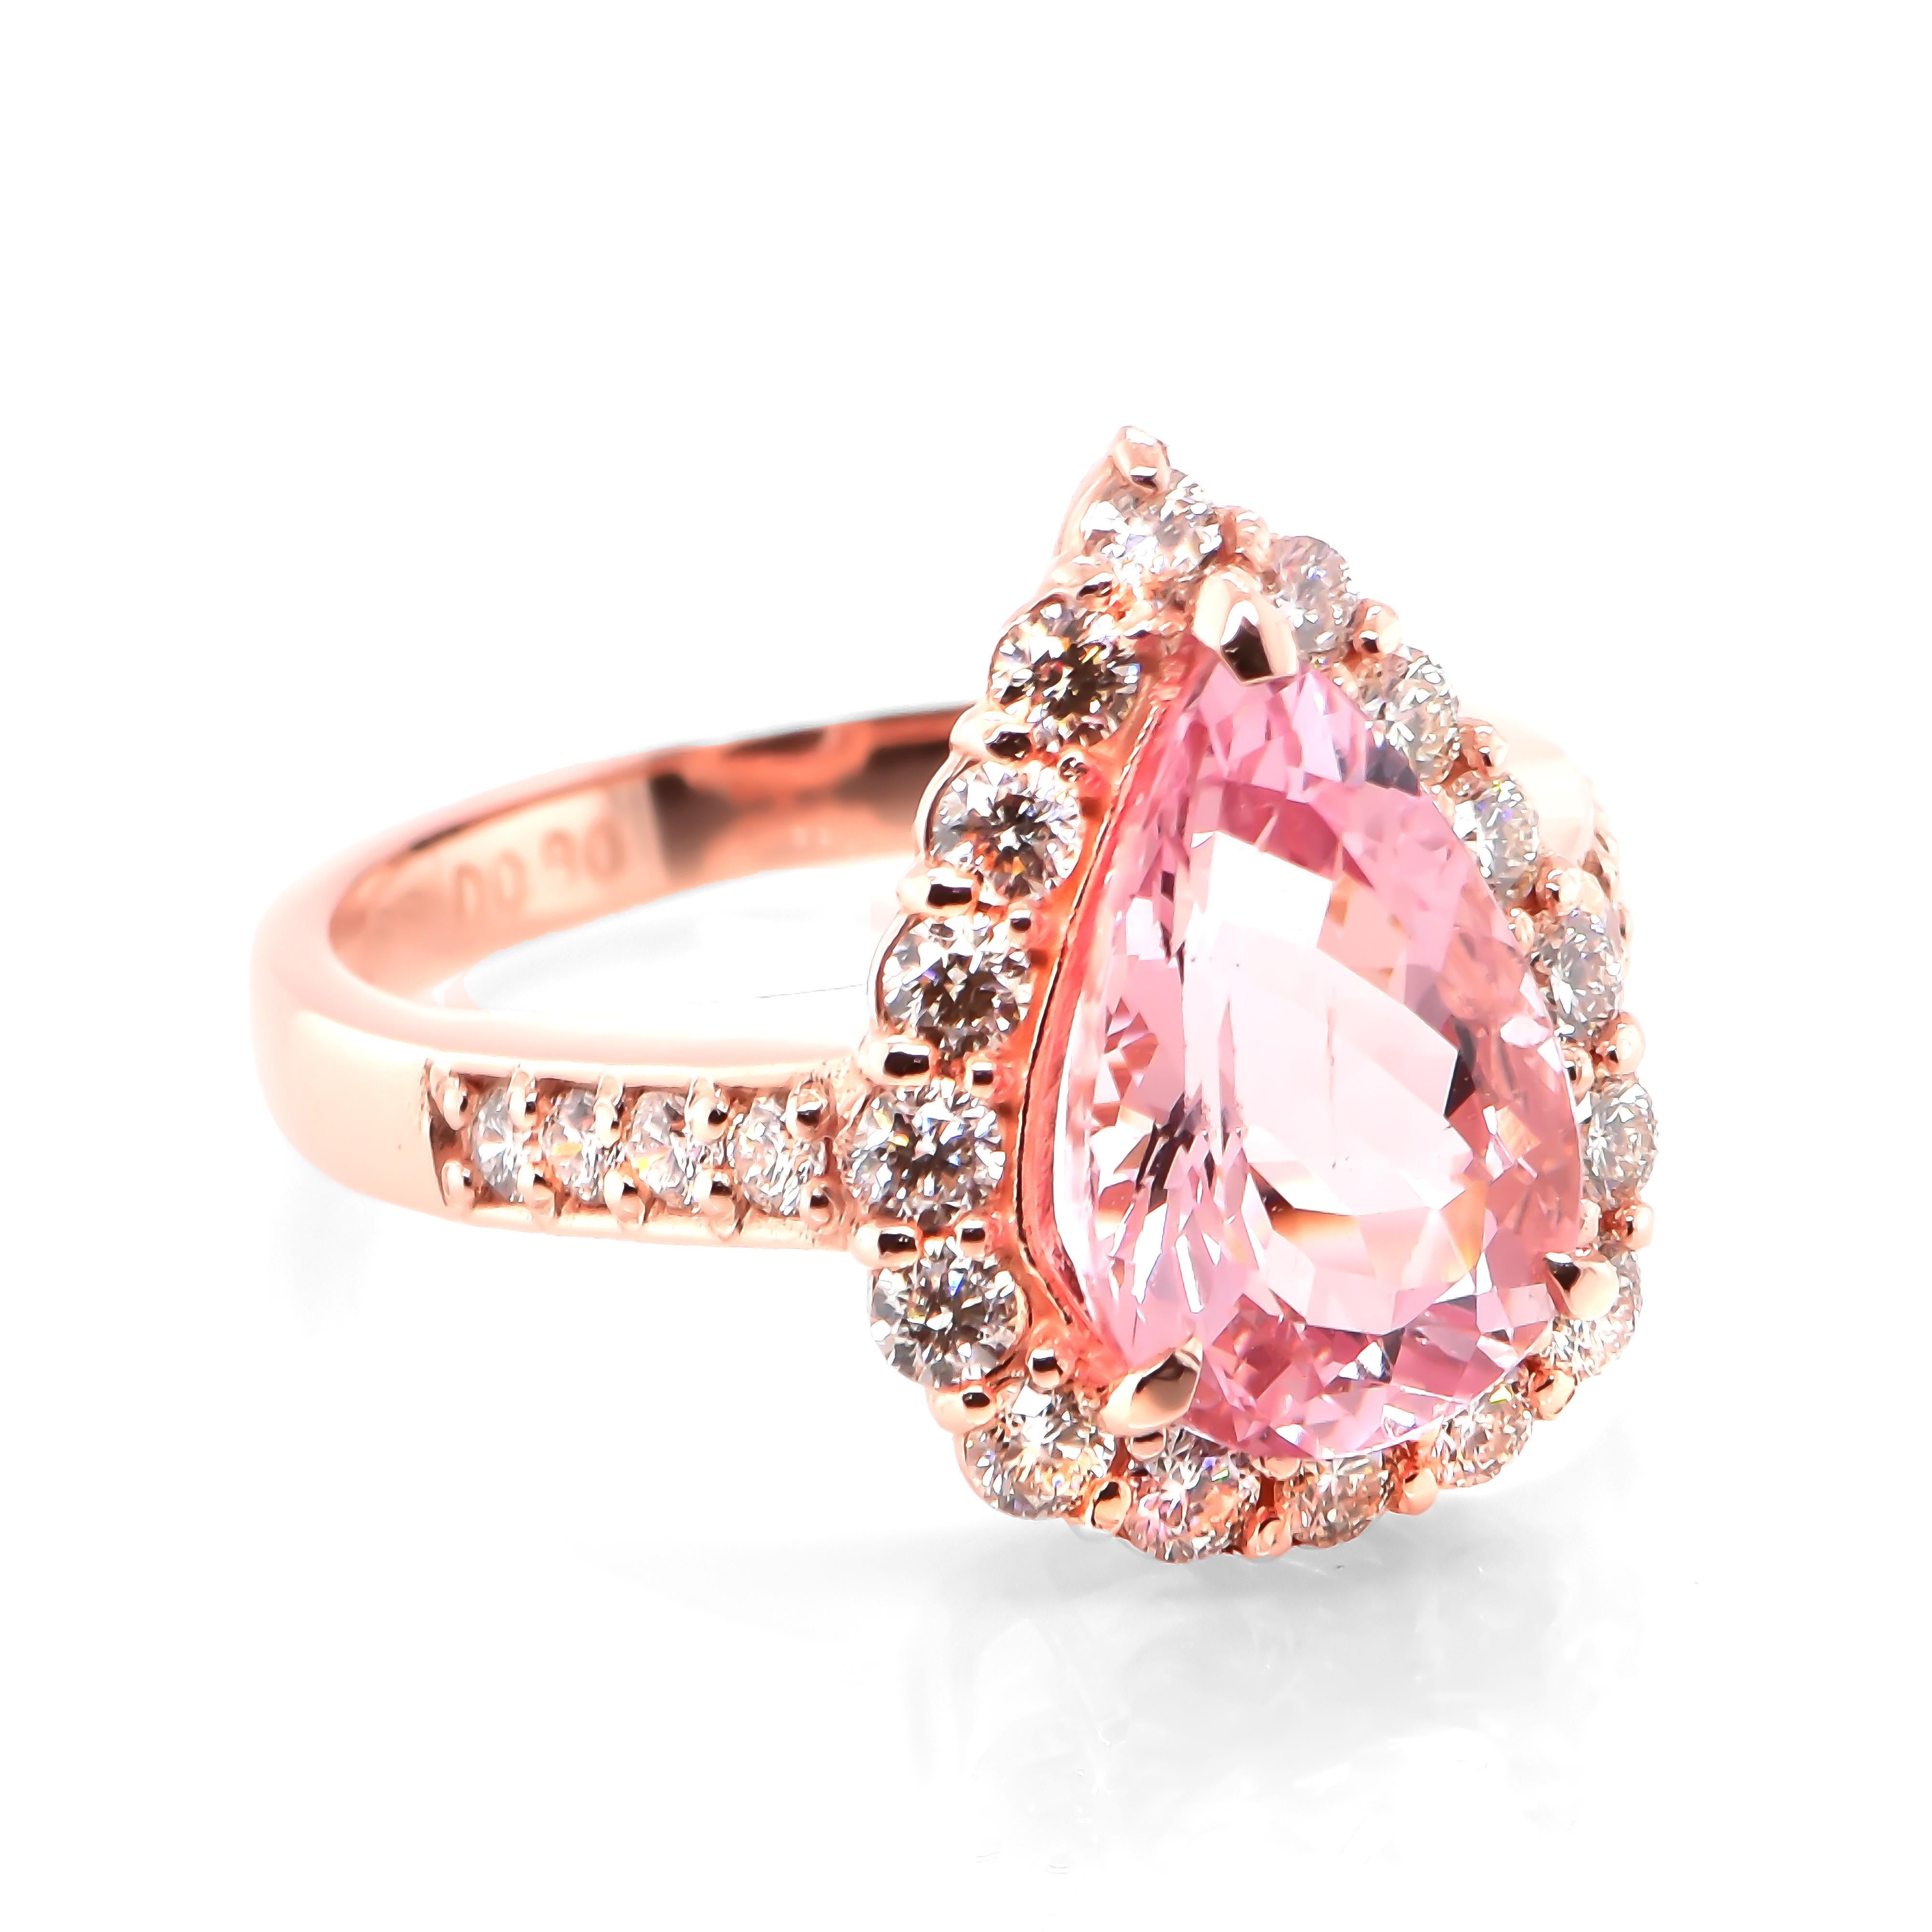 A beautiful Cocktail Ring featuring a 2.88 Carat, Natural Morganite (Pink Beryl) and 0.80 Carats of Diamond Accents set in 18 Karat Rose Gold. Having been first discovered in the early 1900s, Morganite was named after the famed banker and gem